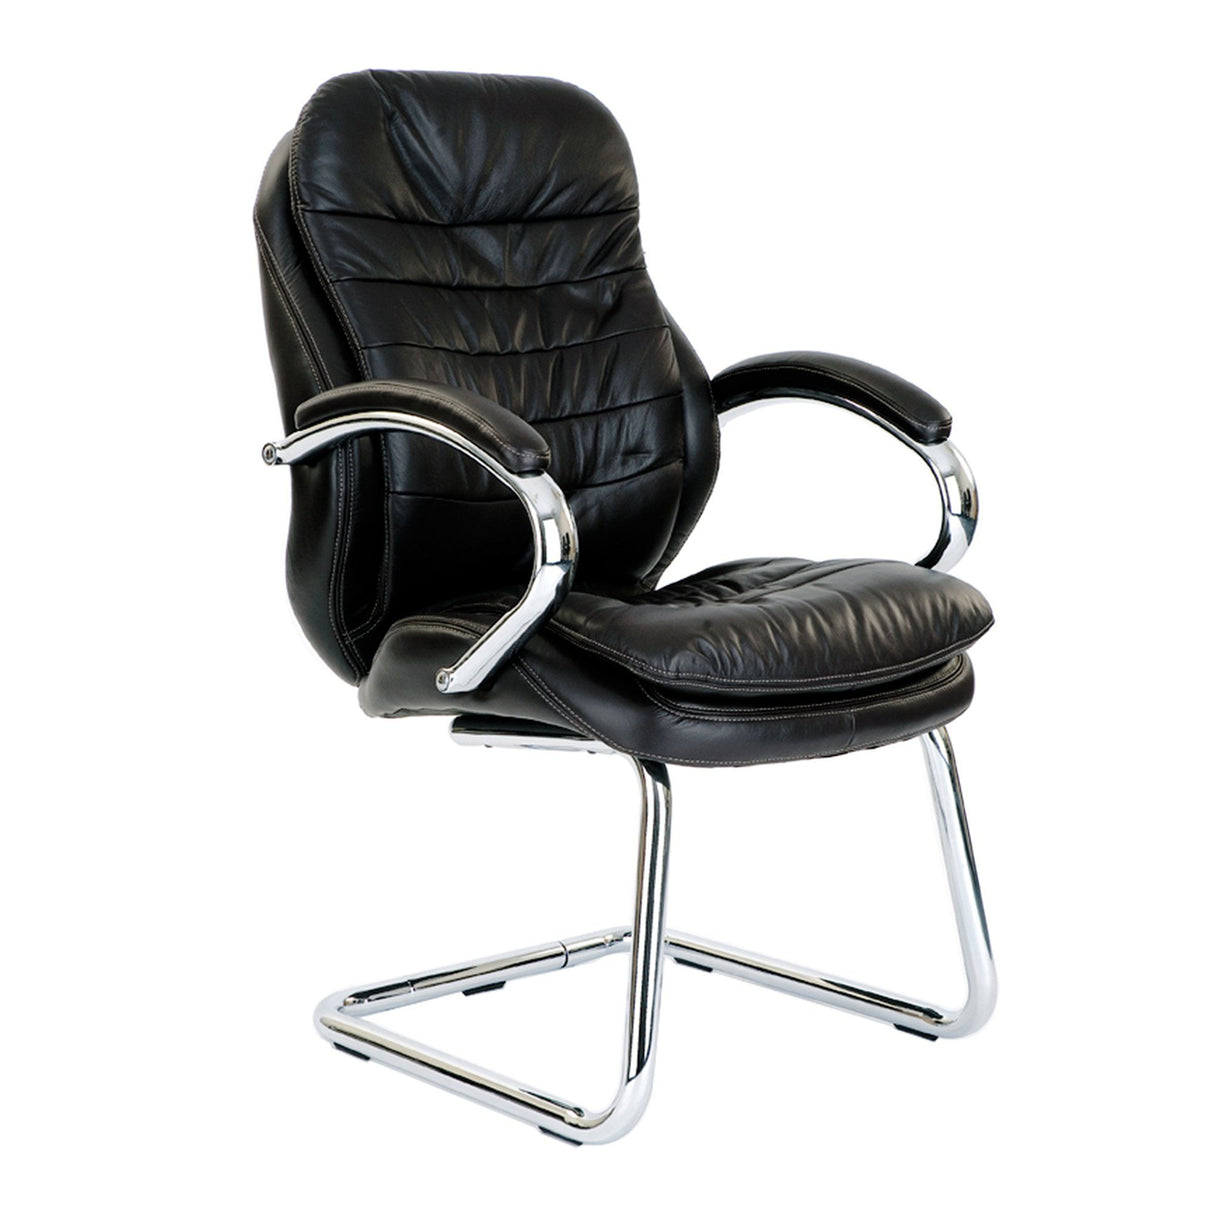 Nautilus Designs Santiago High Back Italian Leather Faced Executive Visitor Armchair with Integral Headrest and Chrome Base - Black